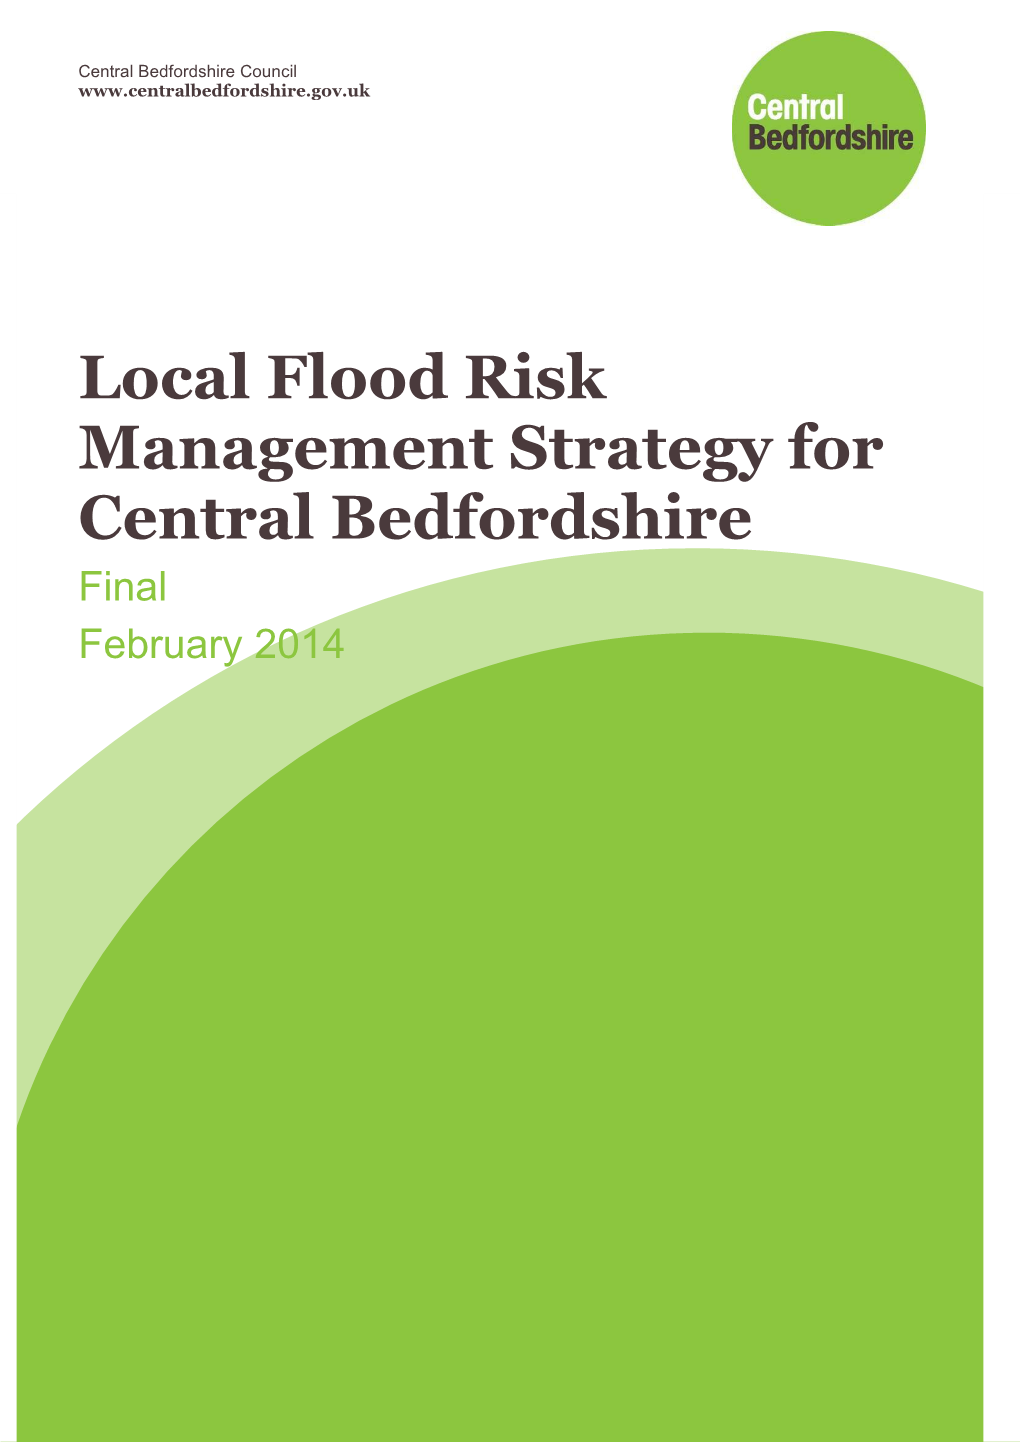 Local Flood Risk Management Strategy for Central Bedfordshire Final February 2014